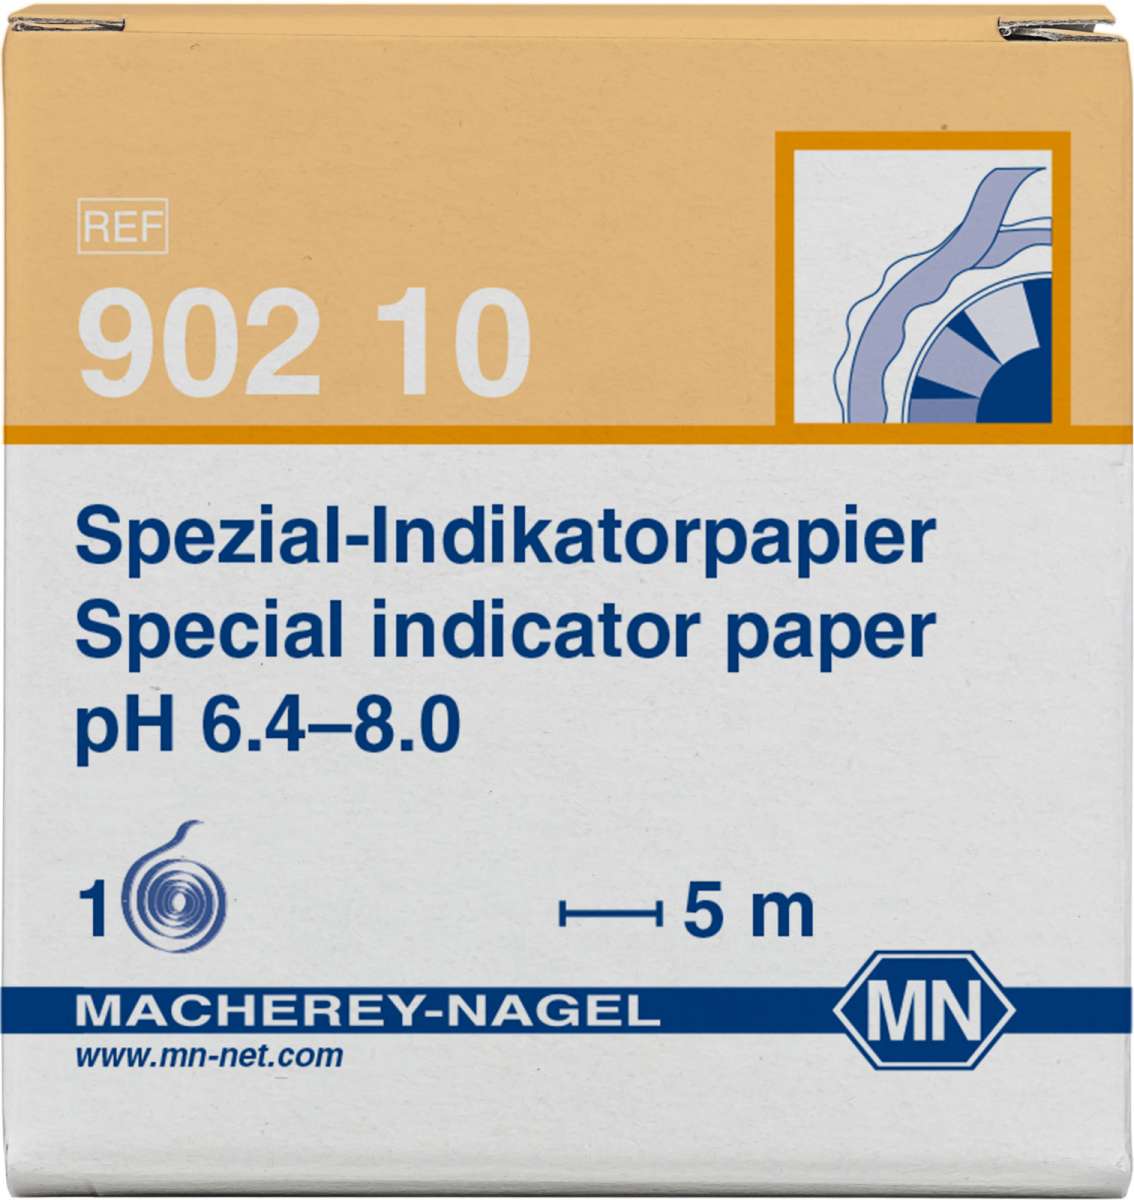 Refill pack for Special indicator paper pH 6.4 to 8.0 (3 reels of 5m length and 7mm width)